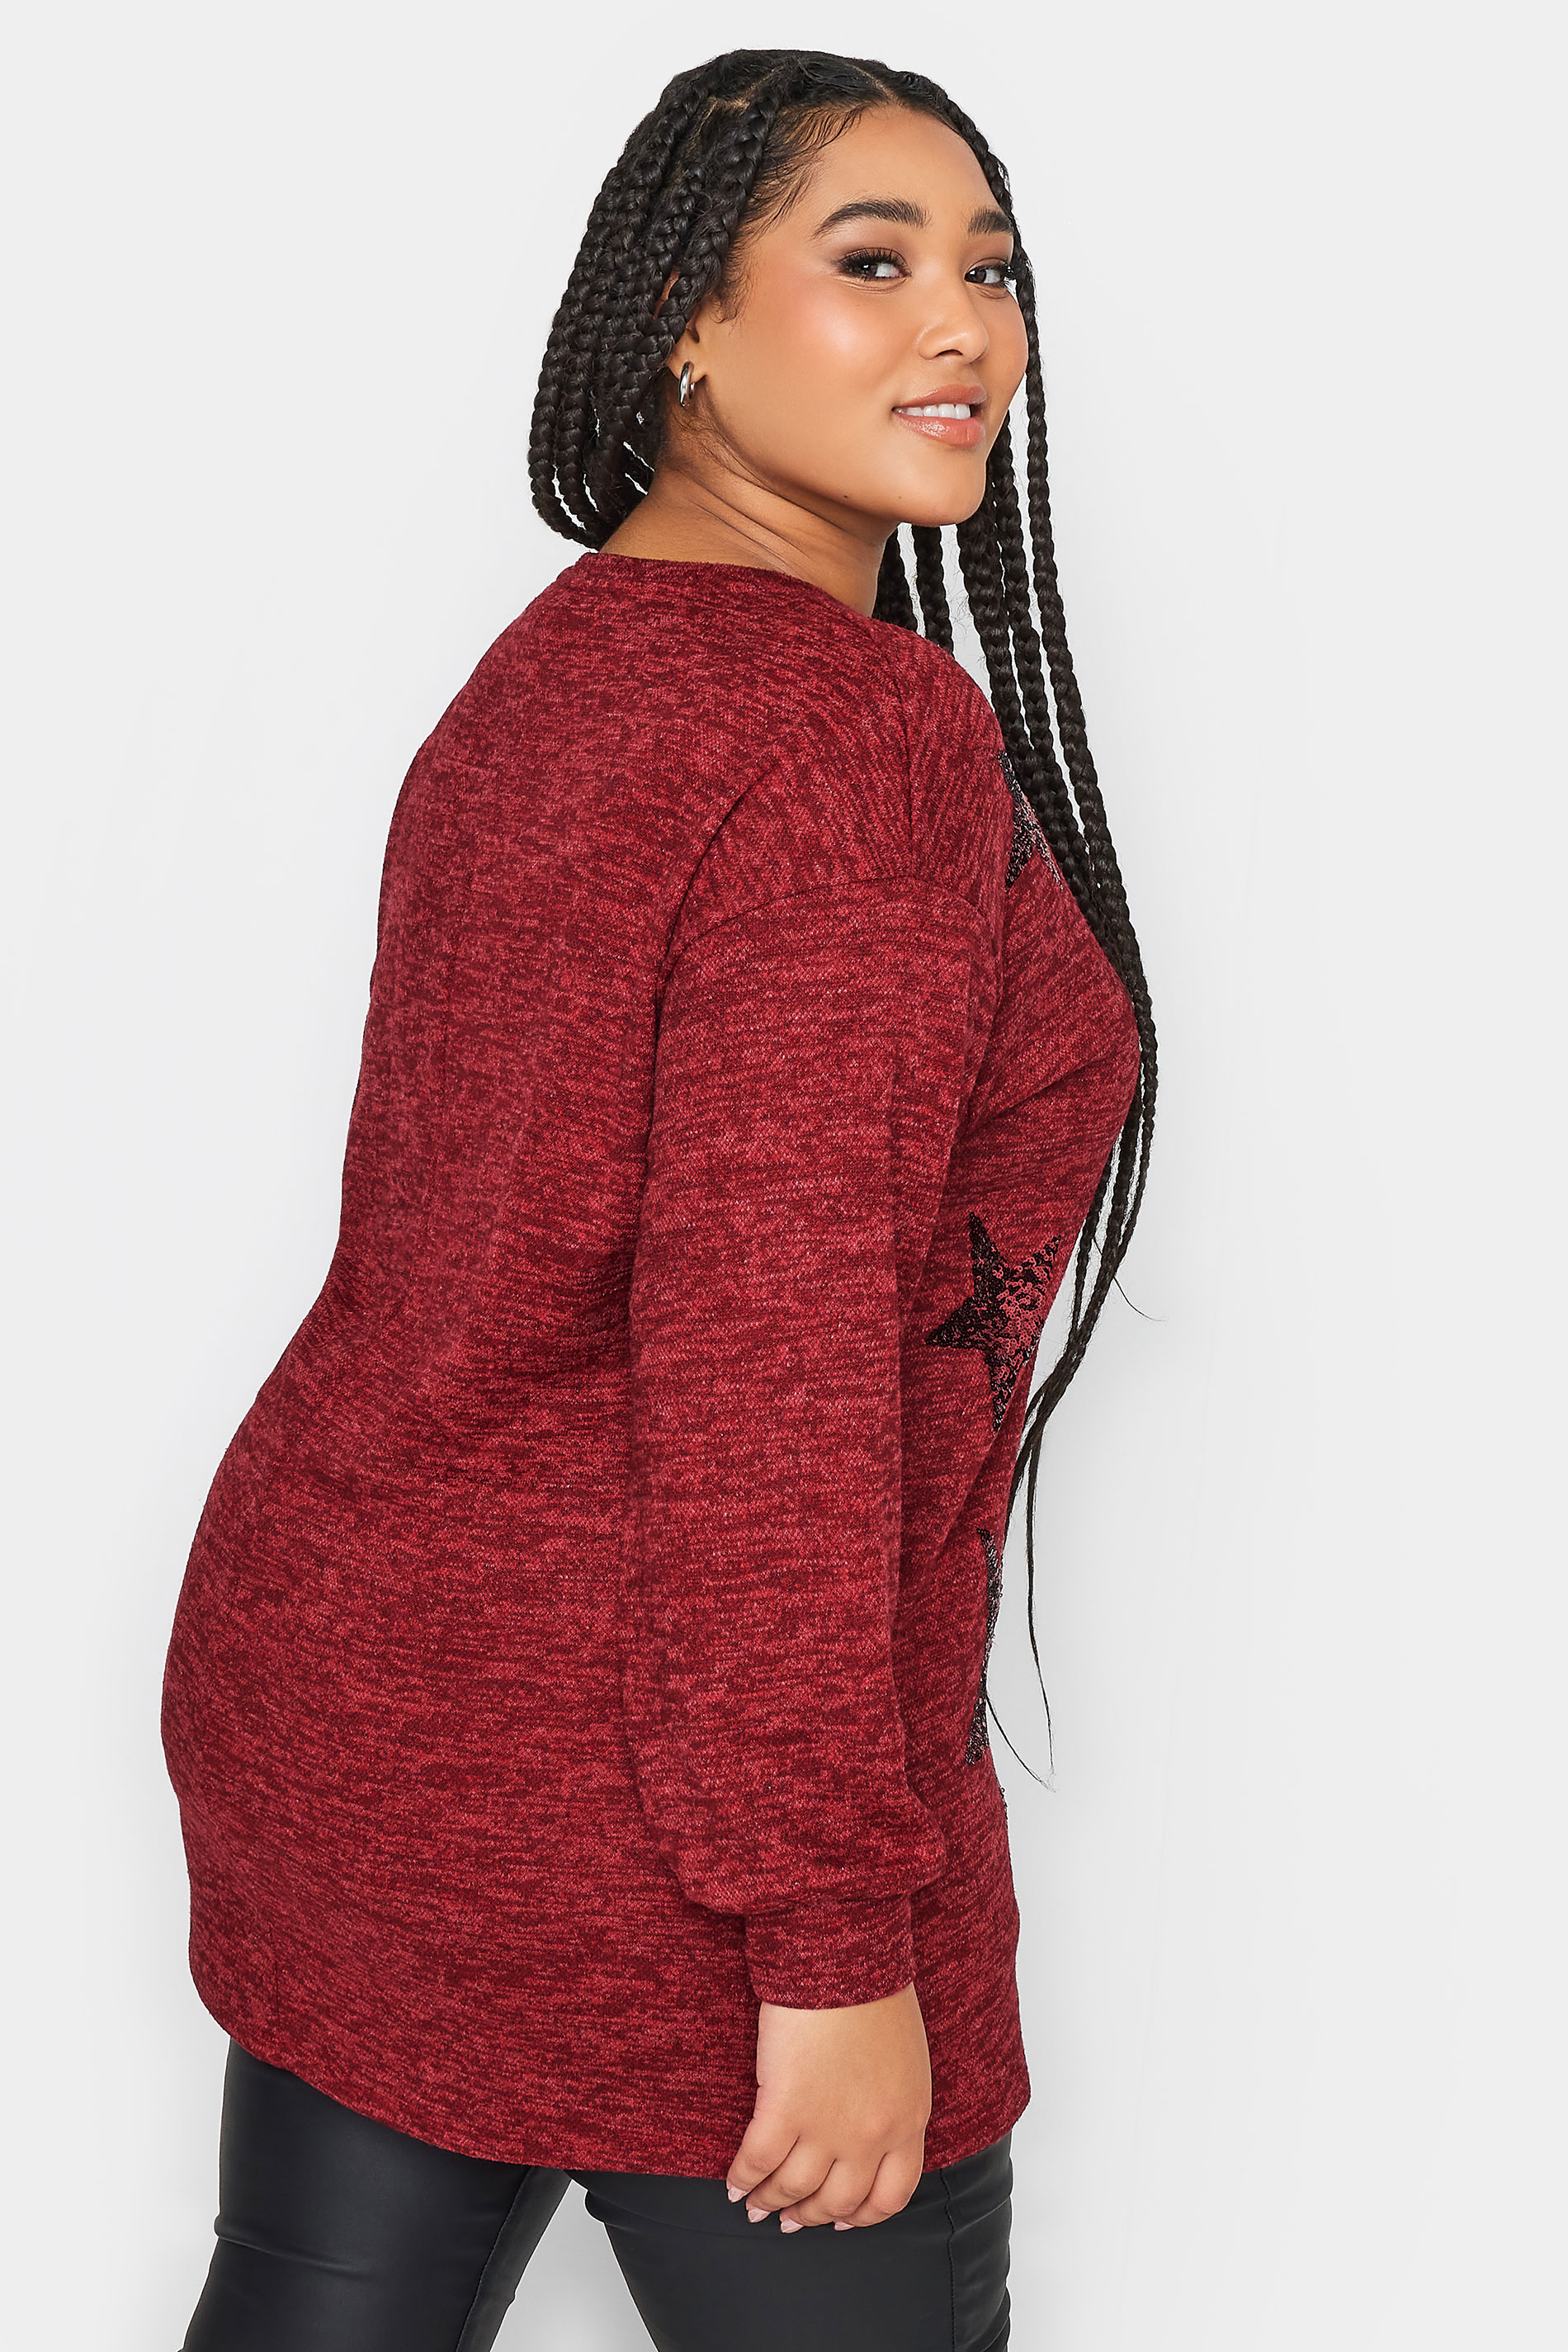 YOURS LUXURY Plus Size Red Sequin Star Print Jumper | Yours Clothing 3